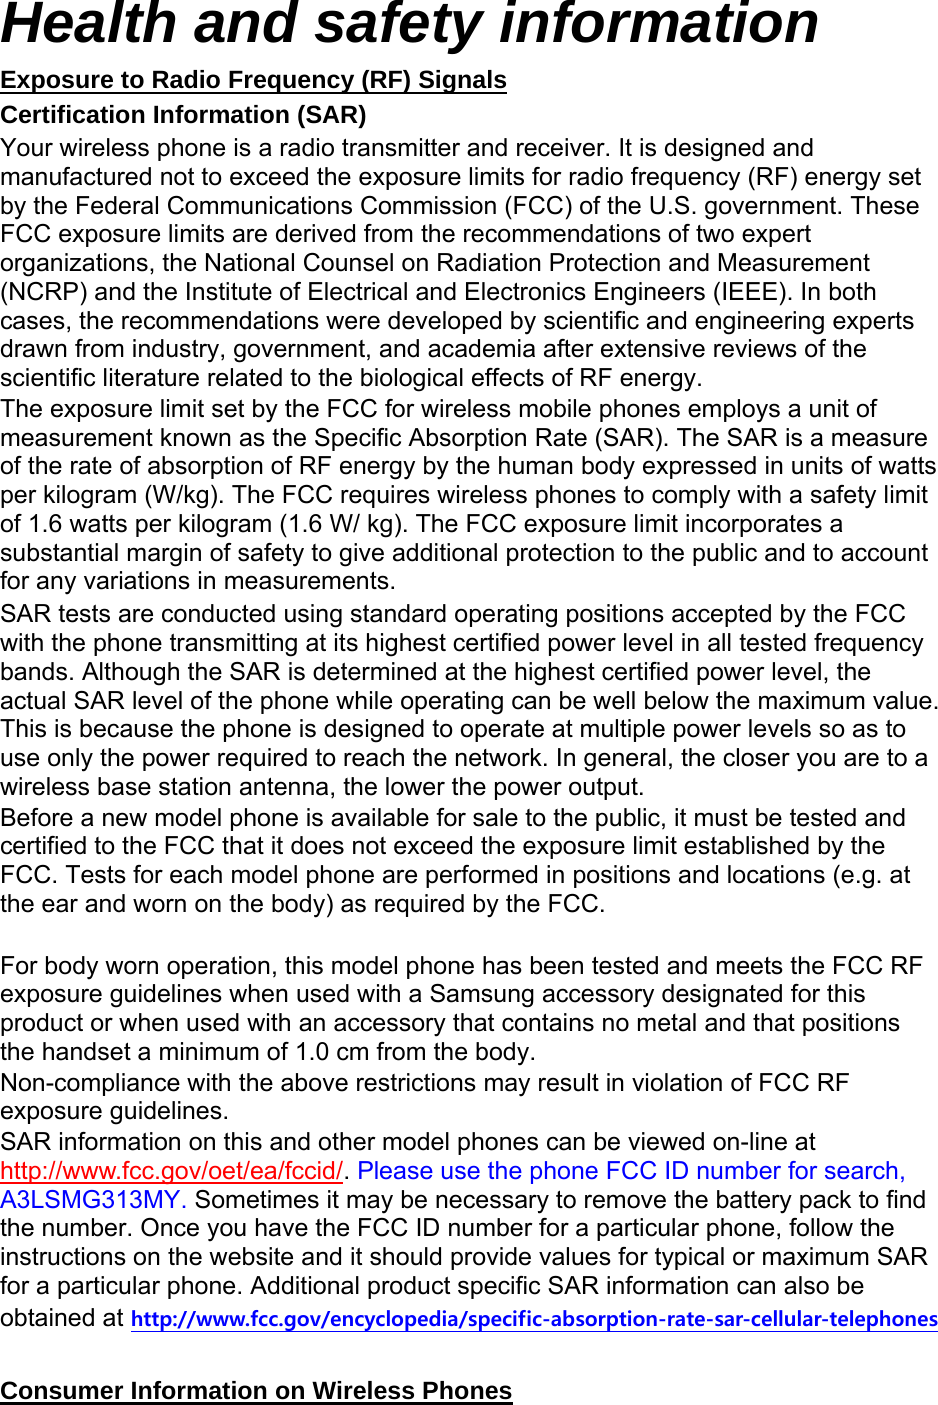 Health and safety information Exposure to Radio Frequency (RF) Signals Certification Information (SAR) Your wireless phone is a radio transmitter and receiver. It is designed and manufactured not to exceed the exposure limits for radio frequency (RF) energy set by the Federal Communications Commission (FCC) of the U.S. government. These FCC exposure limits are derived from the recommendations of two expert organizations, the National Counsel on Radiation Protection and Measurement (NCRP) and the Institute of Electrical and Electronics Engineers (IEEE). In both cases, the recommendations were developed by scientific and engineering experts drawn from industry, government, and academia after extensive reviews of the scientific literature related to the biological effects of RF energy. The exposure limit set by the FCC for wireless mobile phones employs a unit of measurement known as the Specific Absorption Rate (SAR). The SAR is a measure of the rate of absorption of RF energy by the human body expressed in units of watts per kilogram (W/kg). The FCC requires wireless phones to comply with a safety limit of 1.6 watts per kilogram (1.6 W/ kg). The FCC exposure limit incorporates a substantial margin of safety to give additional protection to the public and to account for any variations in measurements. SAR tests are conducted using standard operating positions accepted by the FCC with the phone transmitting at its highest certified power level in all tested frequency bands. Although the SAR is determined at the highest certified power level, the actual SAR level of the phone while operating can be well below the maximum value. This is because the phone is designed to operate at multiple power levels so as to use only the power required to reach the network. In general, the closer you are to a wireless base station antenna, the lower the power output. Before a new model phone is available for sale to the public, it must be tested and certified to the FCC that it does not exceed the exposure limit established by the FCC. Tests for each model phone are performed in positions and locations (e.g. at the ear and worn on the body) as required by the FCC.      For body worn operation, this model phone has been tested and meets the FCC RF exposure guidelines when used with a Samsung accessory designated for this product or when used with an accessory that contains no metal and that positions the handset a minimum of 1.0 cm from the body.   Non-compliance with the above restrictions may result in violation of FCC RF exposure guidelines. SAR information on this and other model phones can be viewed on-line at http://www.fcc.gov/oet/ea/fccid/. Please use the phone FCC ID number for search, A3LSMG313MY. Sometimes it may be necessary to remove the battery pack to find the number. Once you have the FCC ID number for a particular phone, follow the instructions on the website and it should provide values for typical or maximum SAR for a particular phone. Additional product specific SAR information can also be obtained at http://www.fcc.gov/encyclopedia/specific-absorption-rate-sar-cellular-telephones  Consumer Information on Wireless Phones 